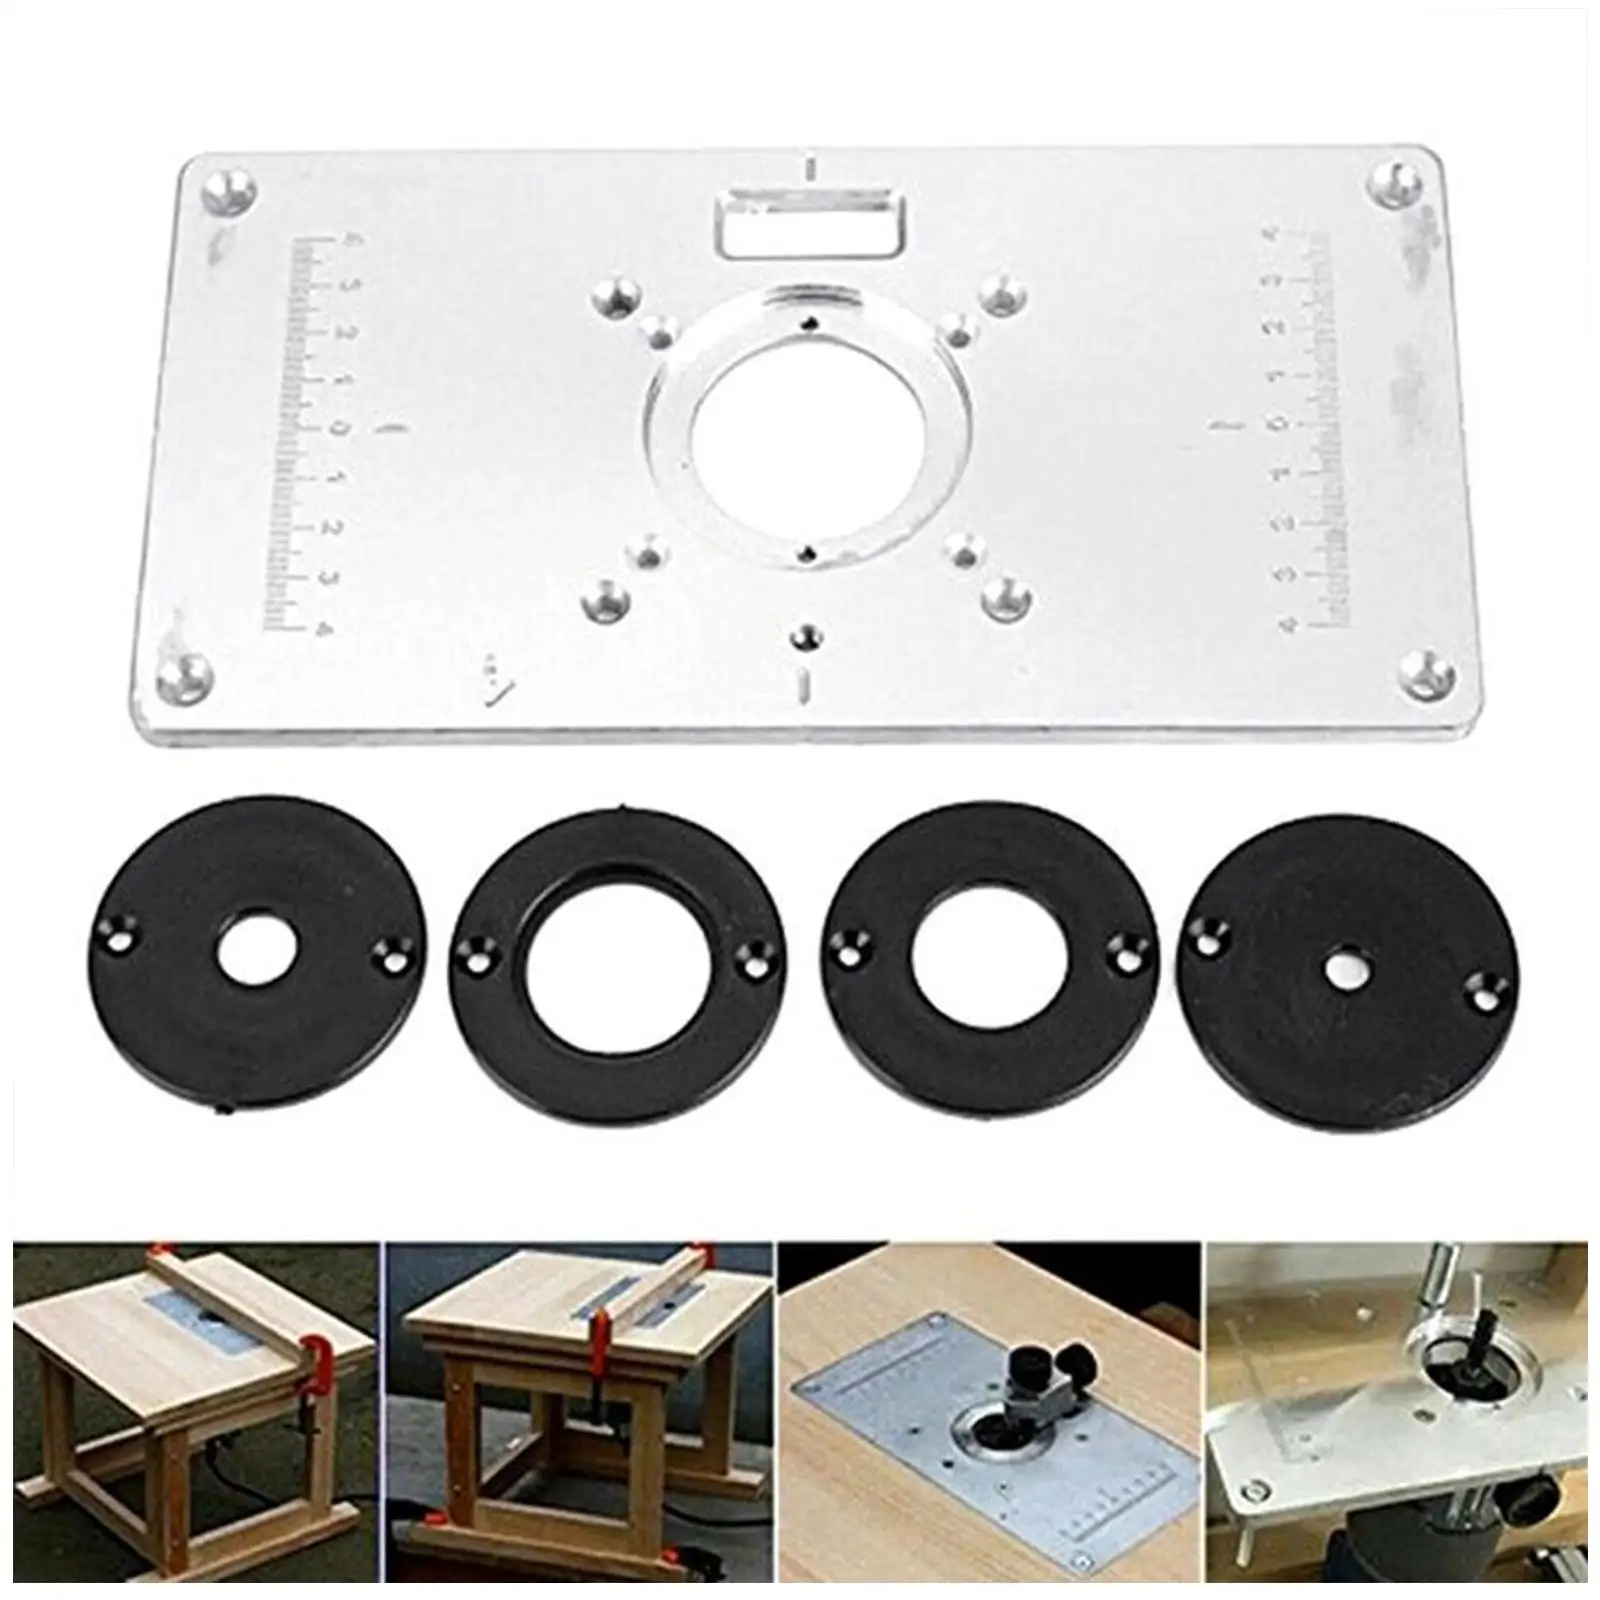 Multifunctional Aluminium Router Table Insert Plate Machine Trimmer Router Woodworking Engraving Wood Models Benches J3X8